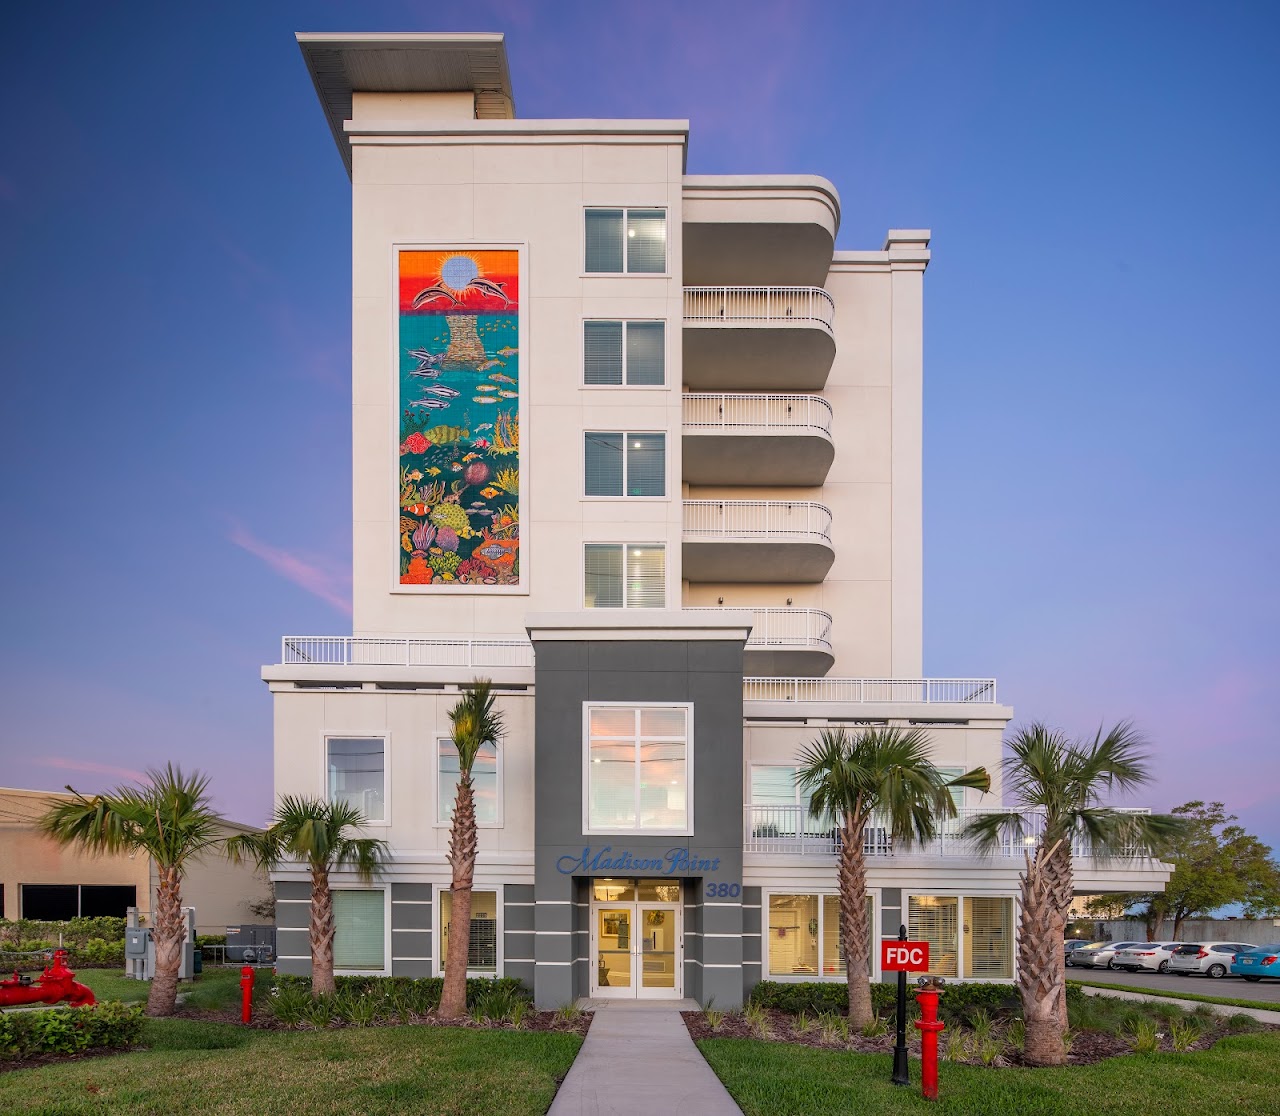 Photo of MADISON POINT. Affordable housing located at 380 SOUTH MLK JR. AVENUE CLEARWATER, FL 33756